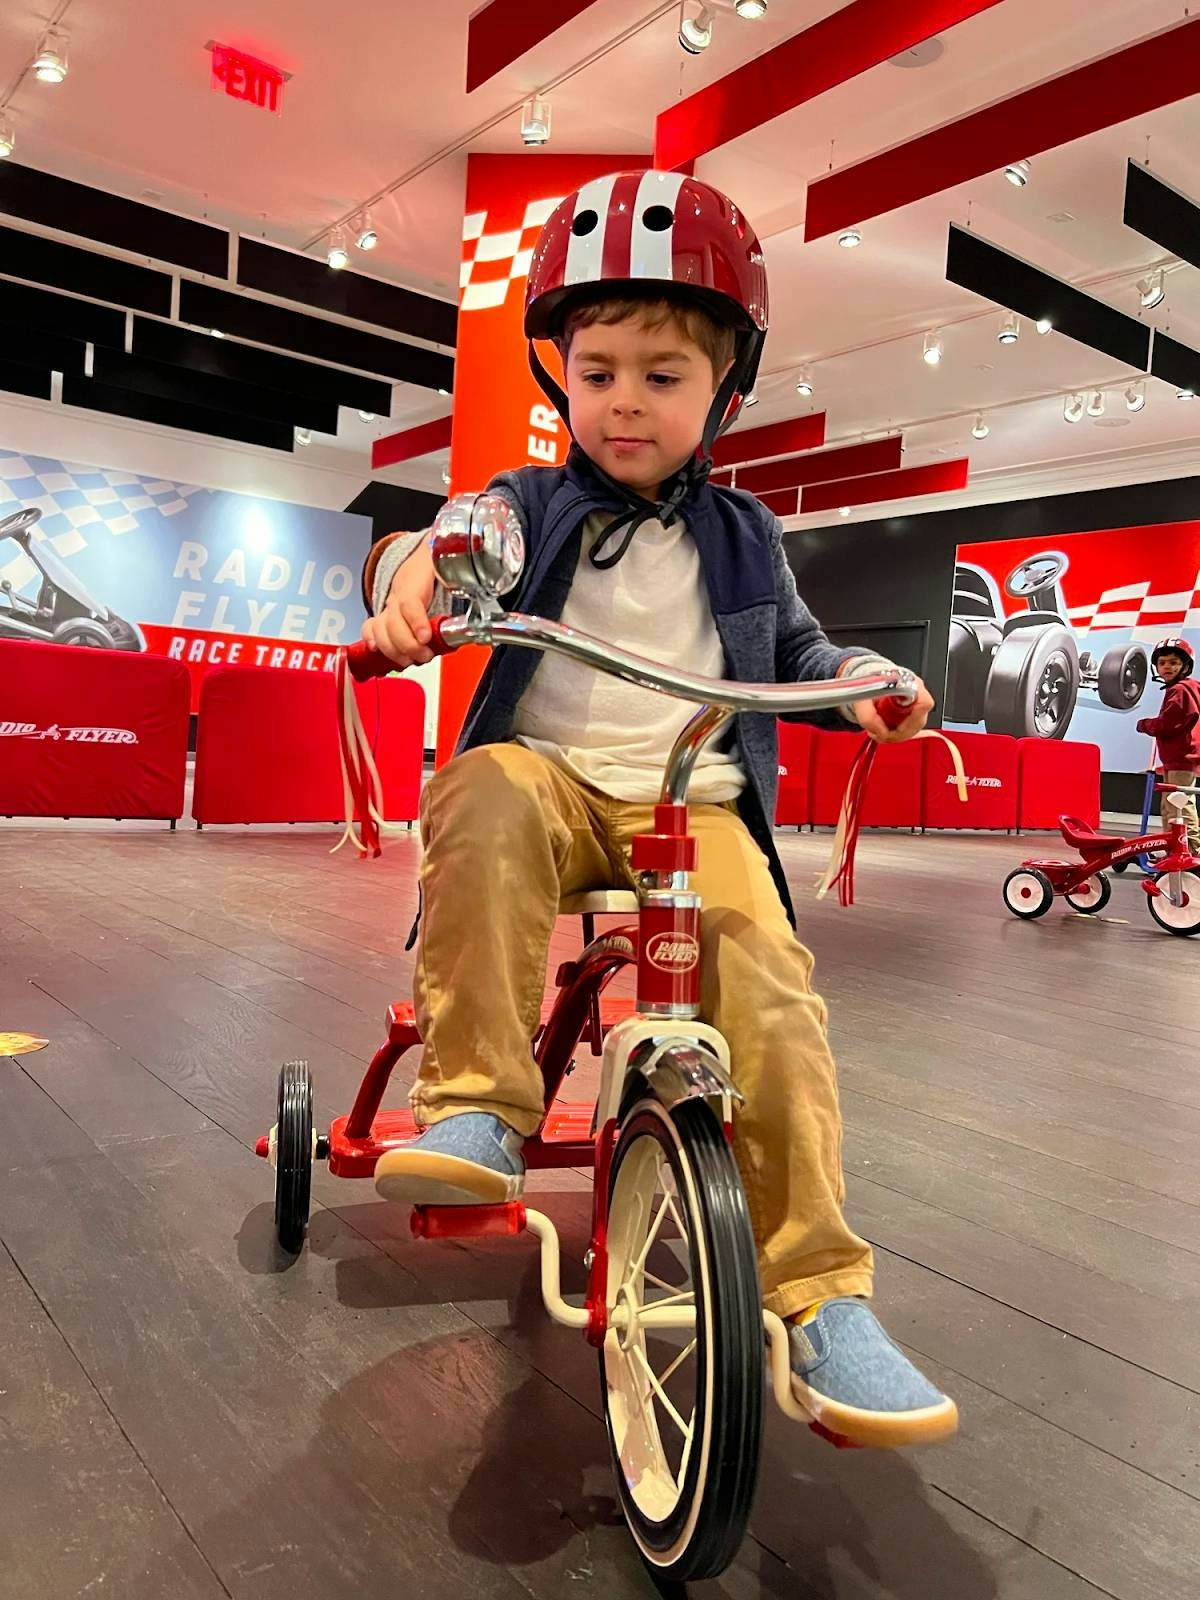 A young boy rides a tricycle inside the Radio Flyer store. 